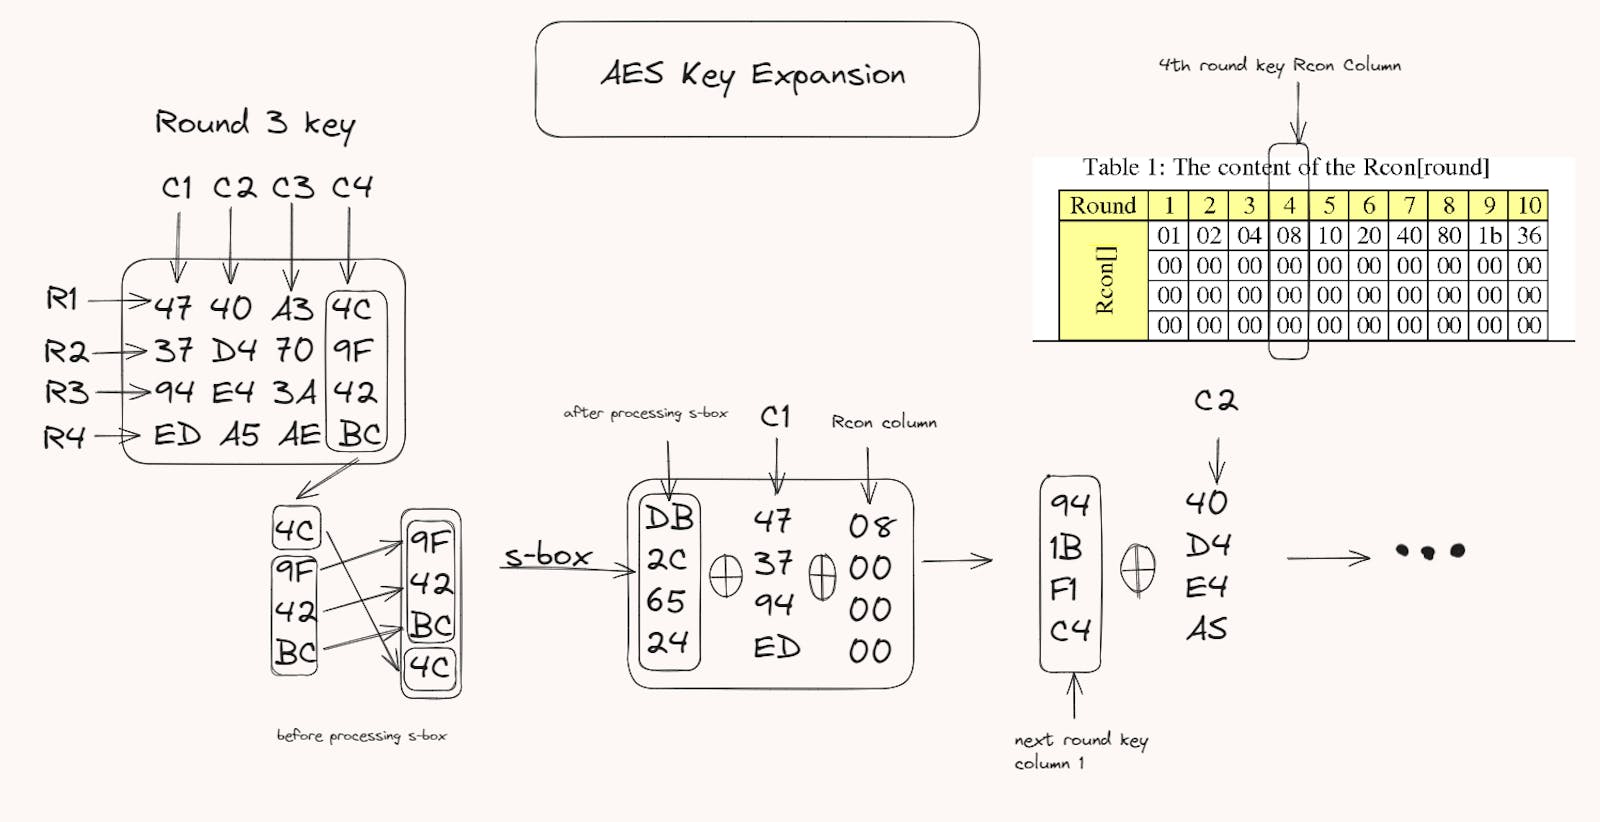 Demystifying AES Key Expansion: A Deep Dive into Secure Cryptography